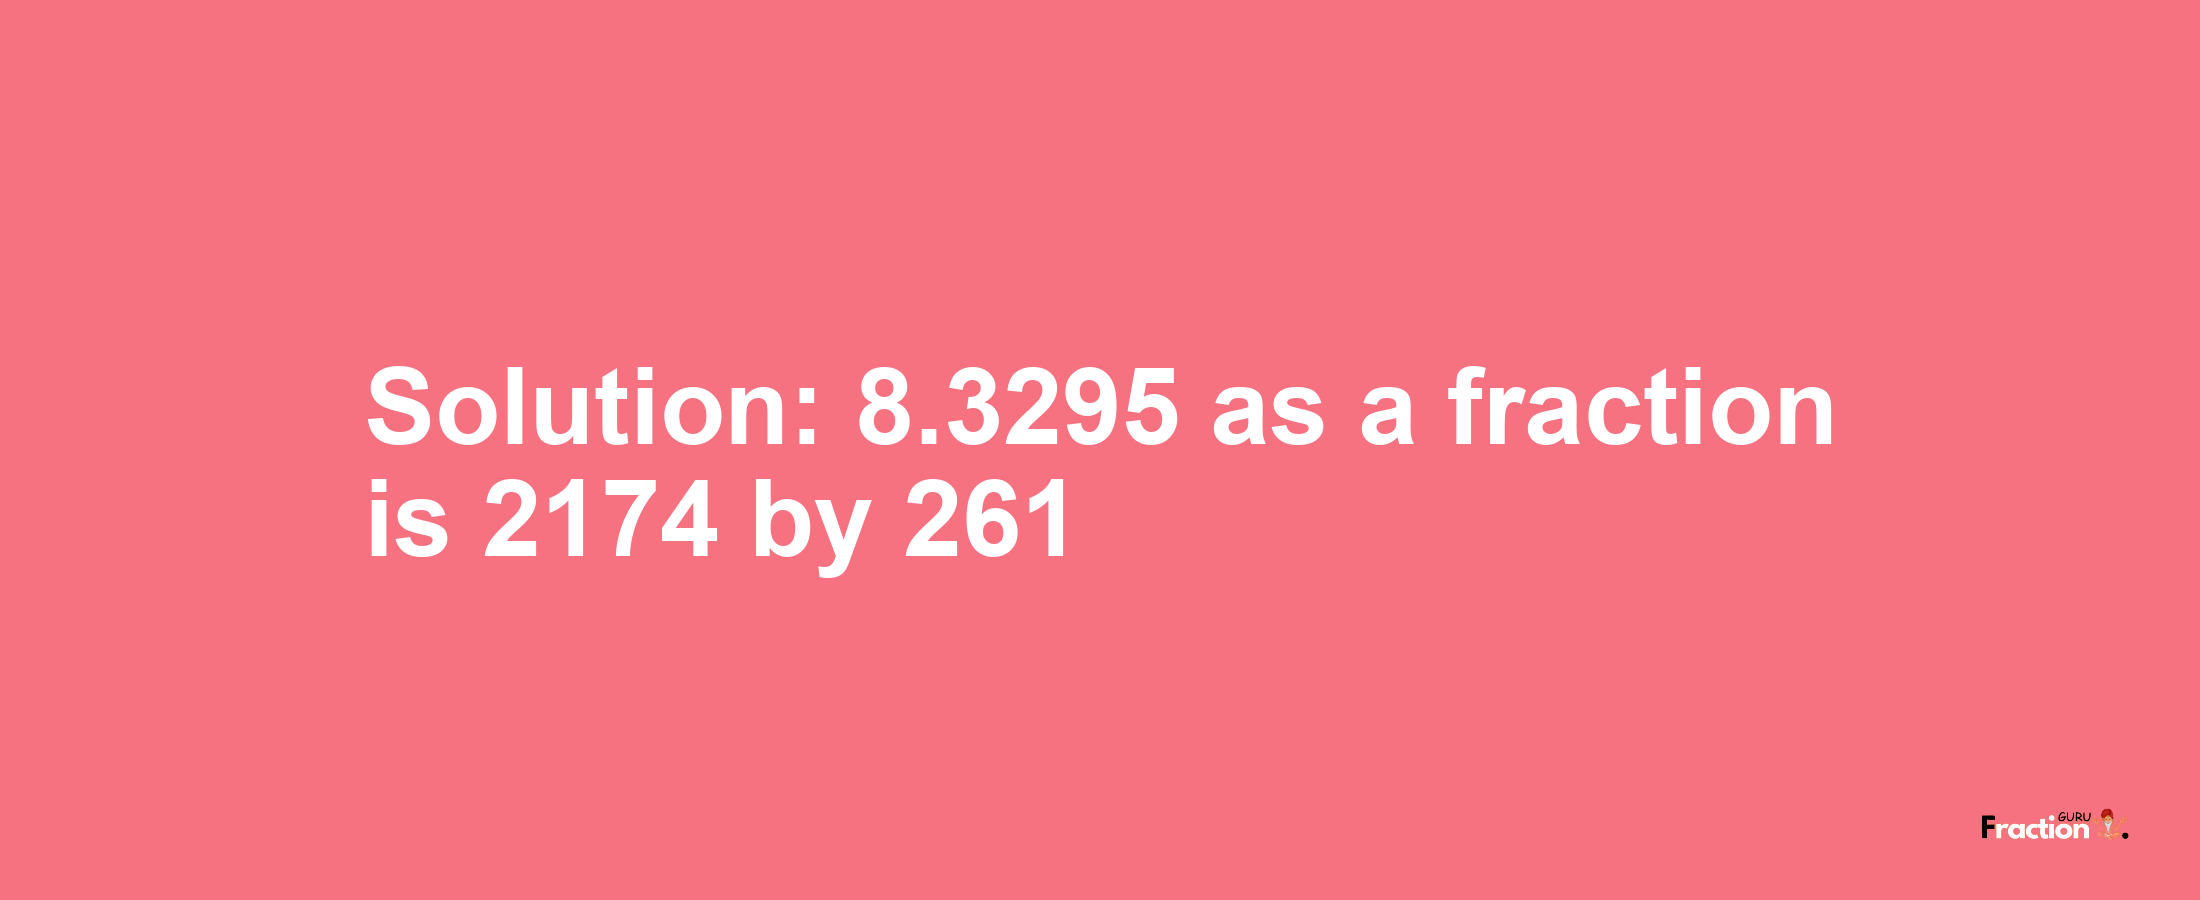 Solution:8.3295 as a fraction is 2174/261